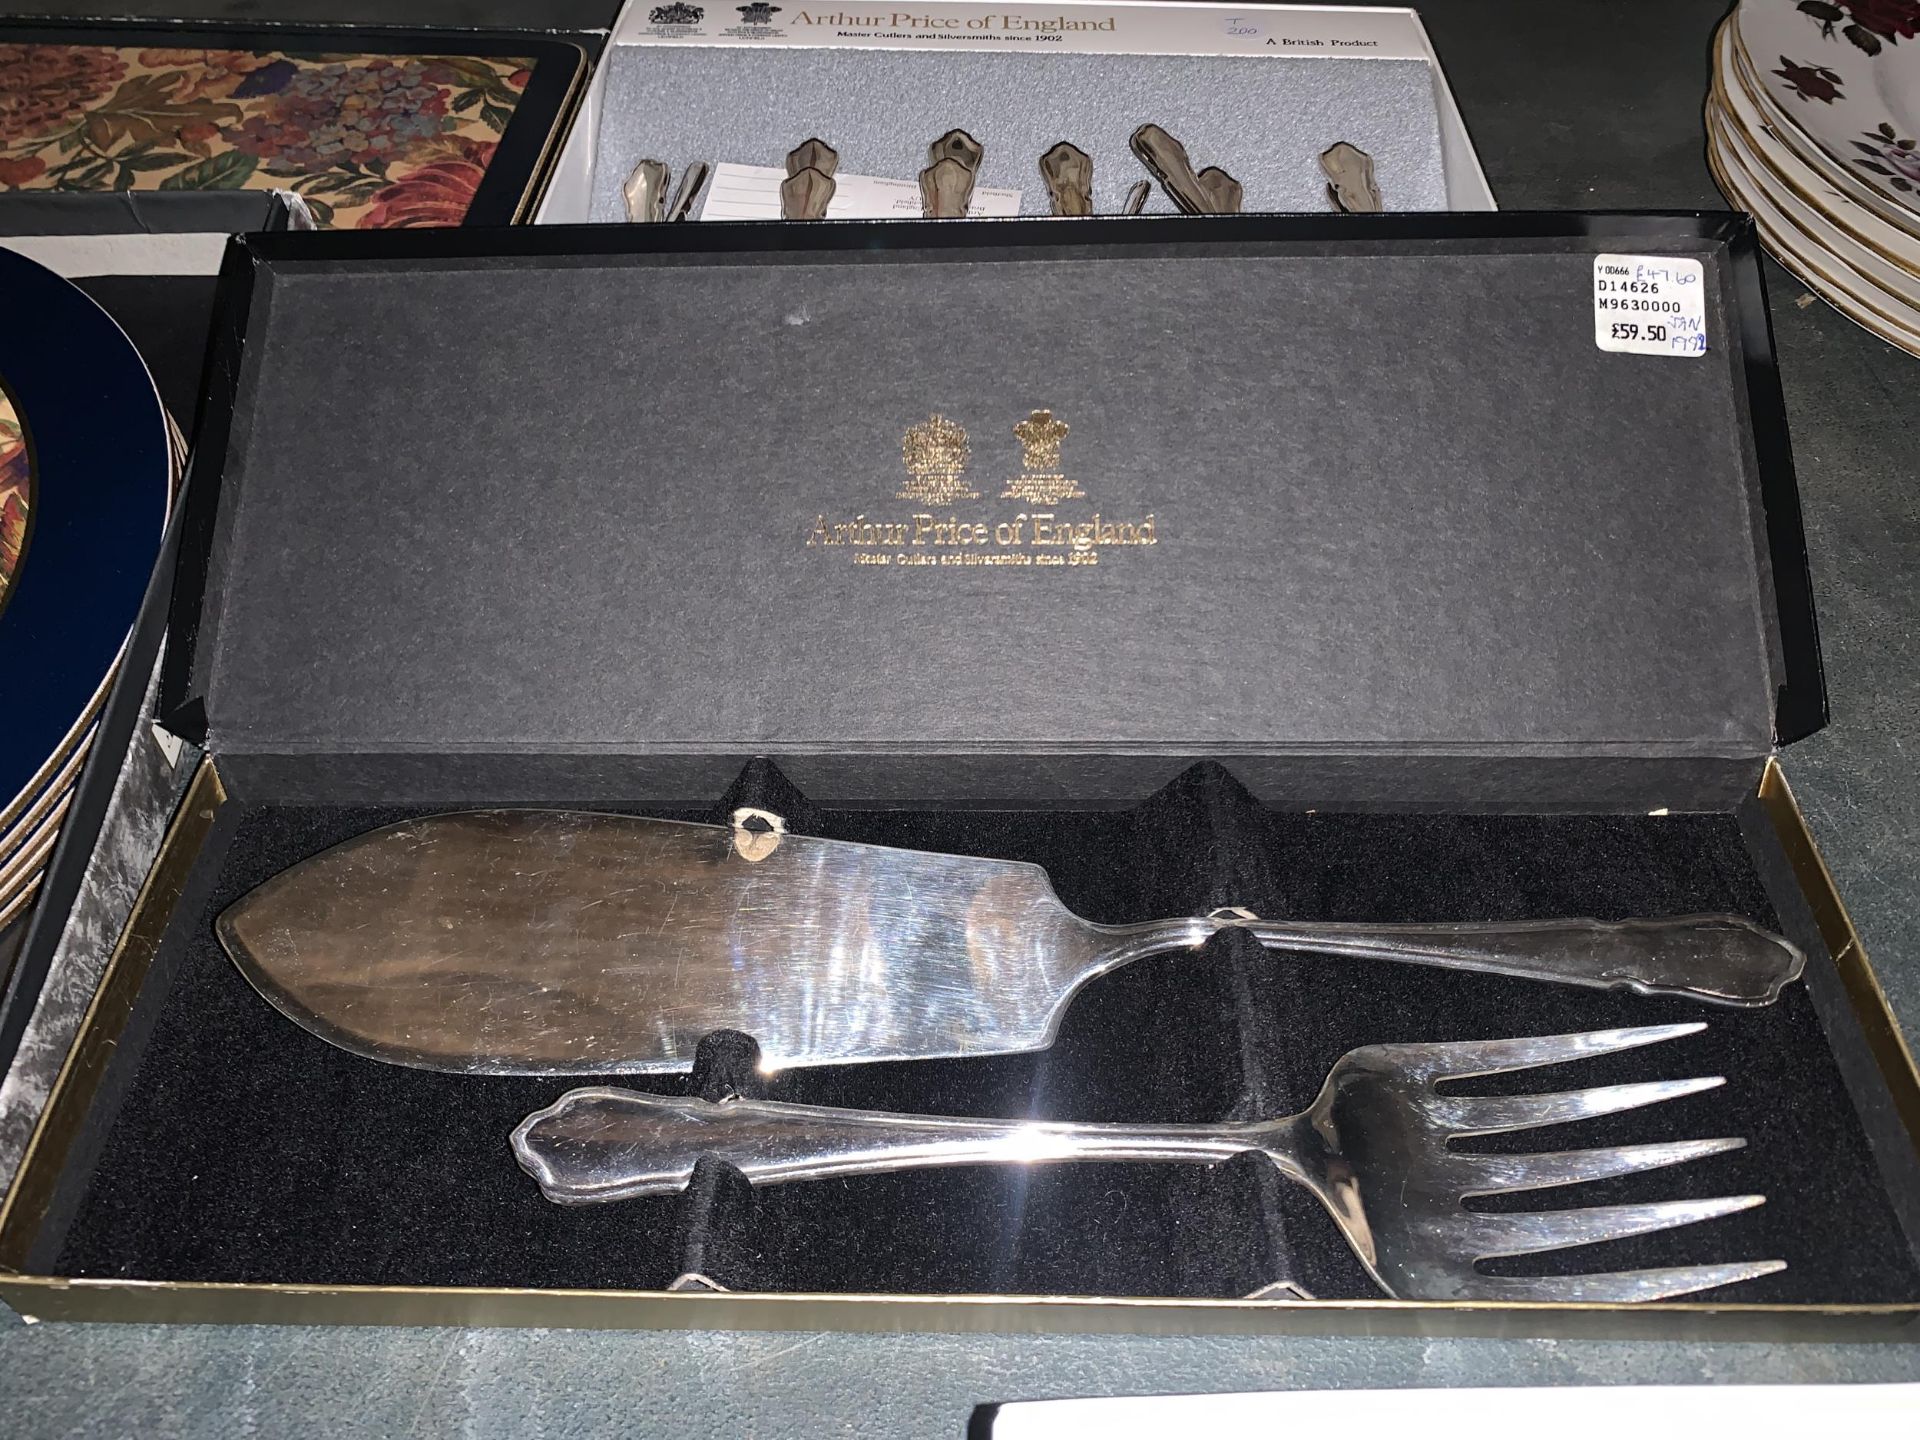 A MIXED LOT OF BOXED FLATWARE TO INCLUDE "AUTHUR PRICE OF ENGLAND" WITH FUTHER BOXED PLACEMATS AND - Image 3 of 4